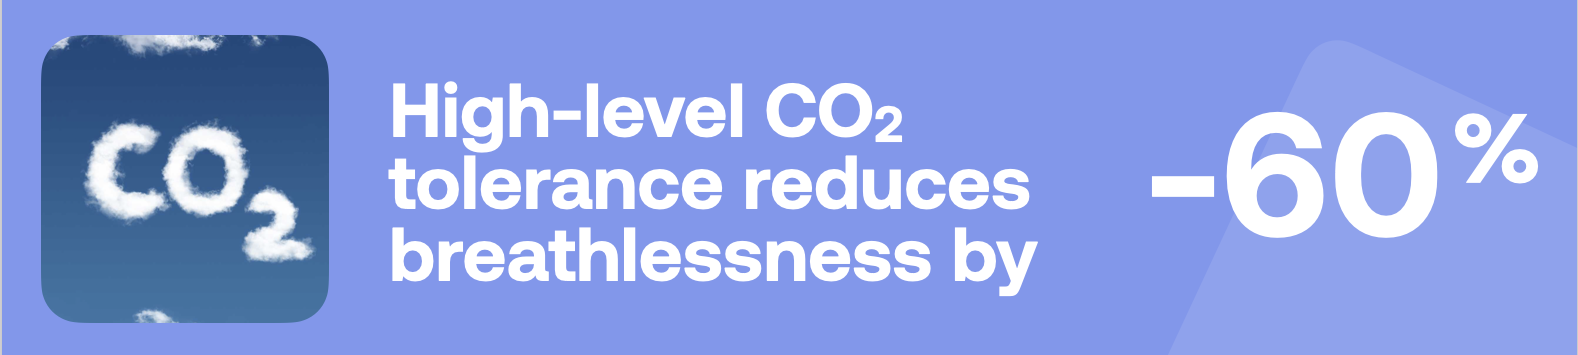 High-level CO₂ tolerance reduces breathless by -60%